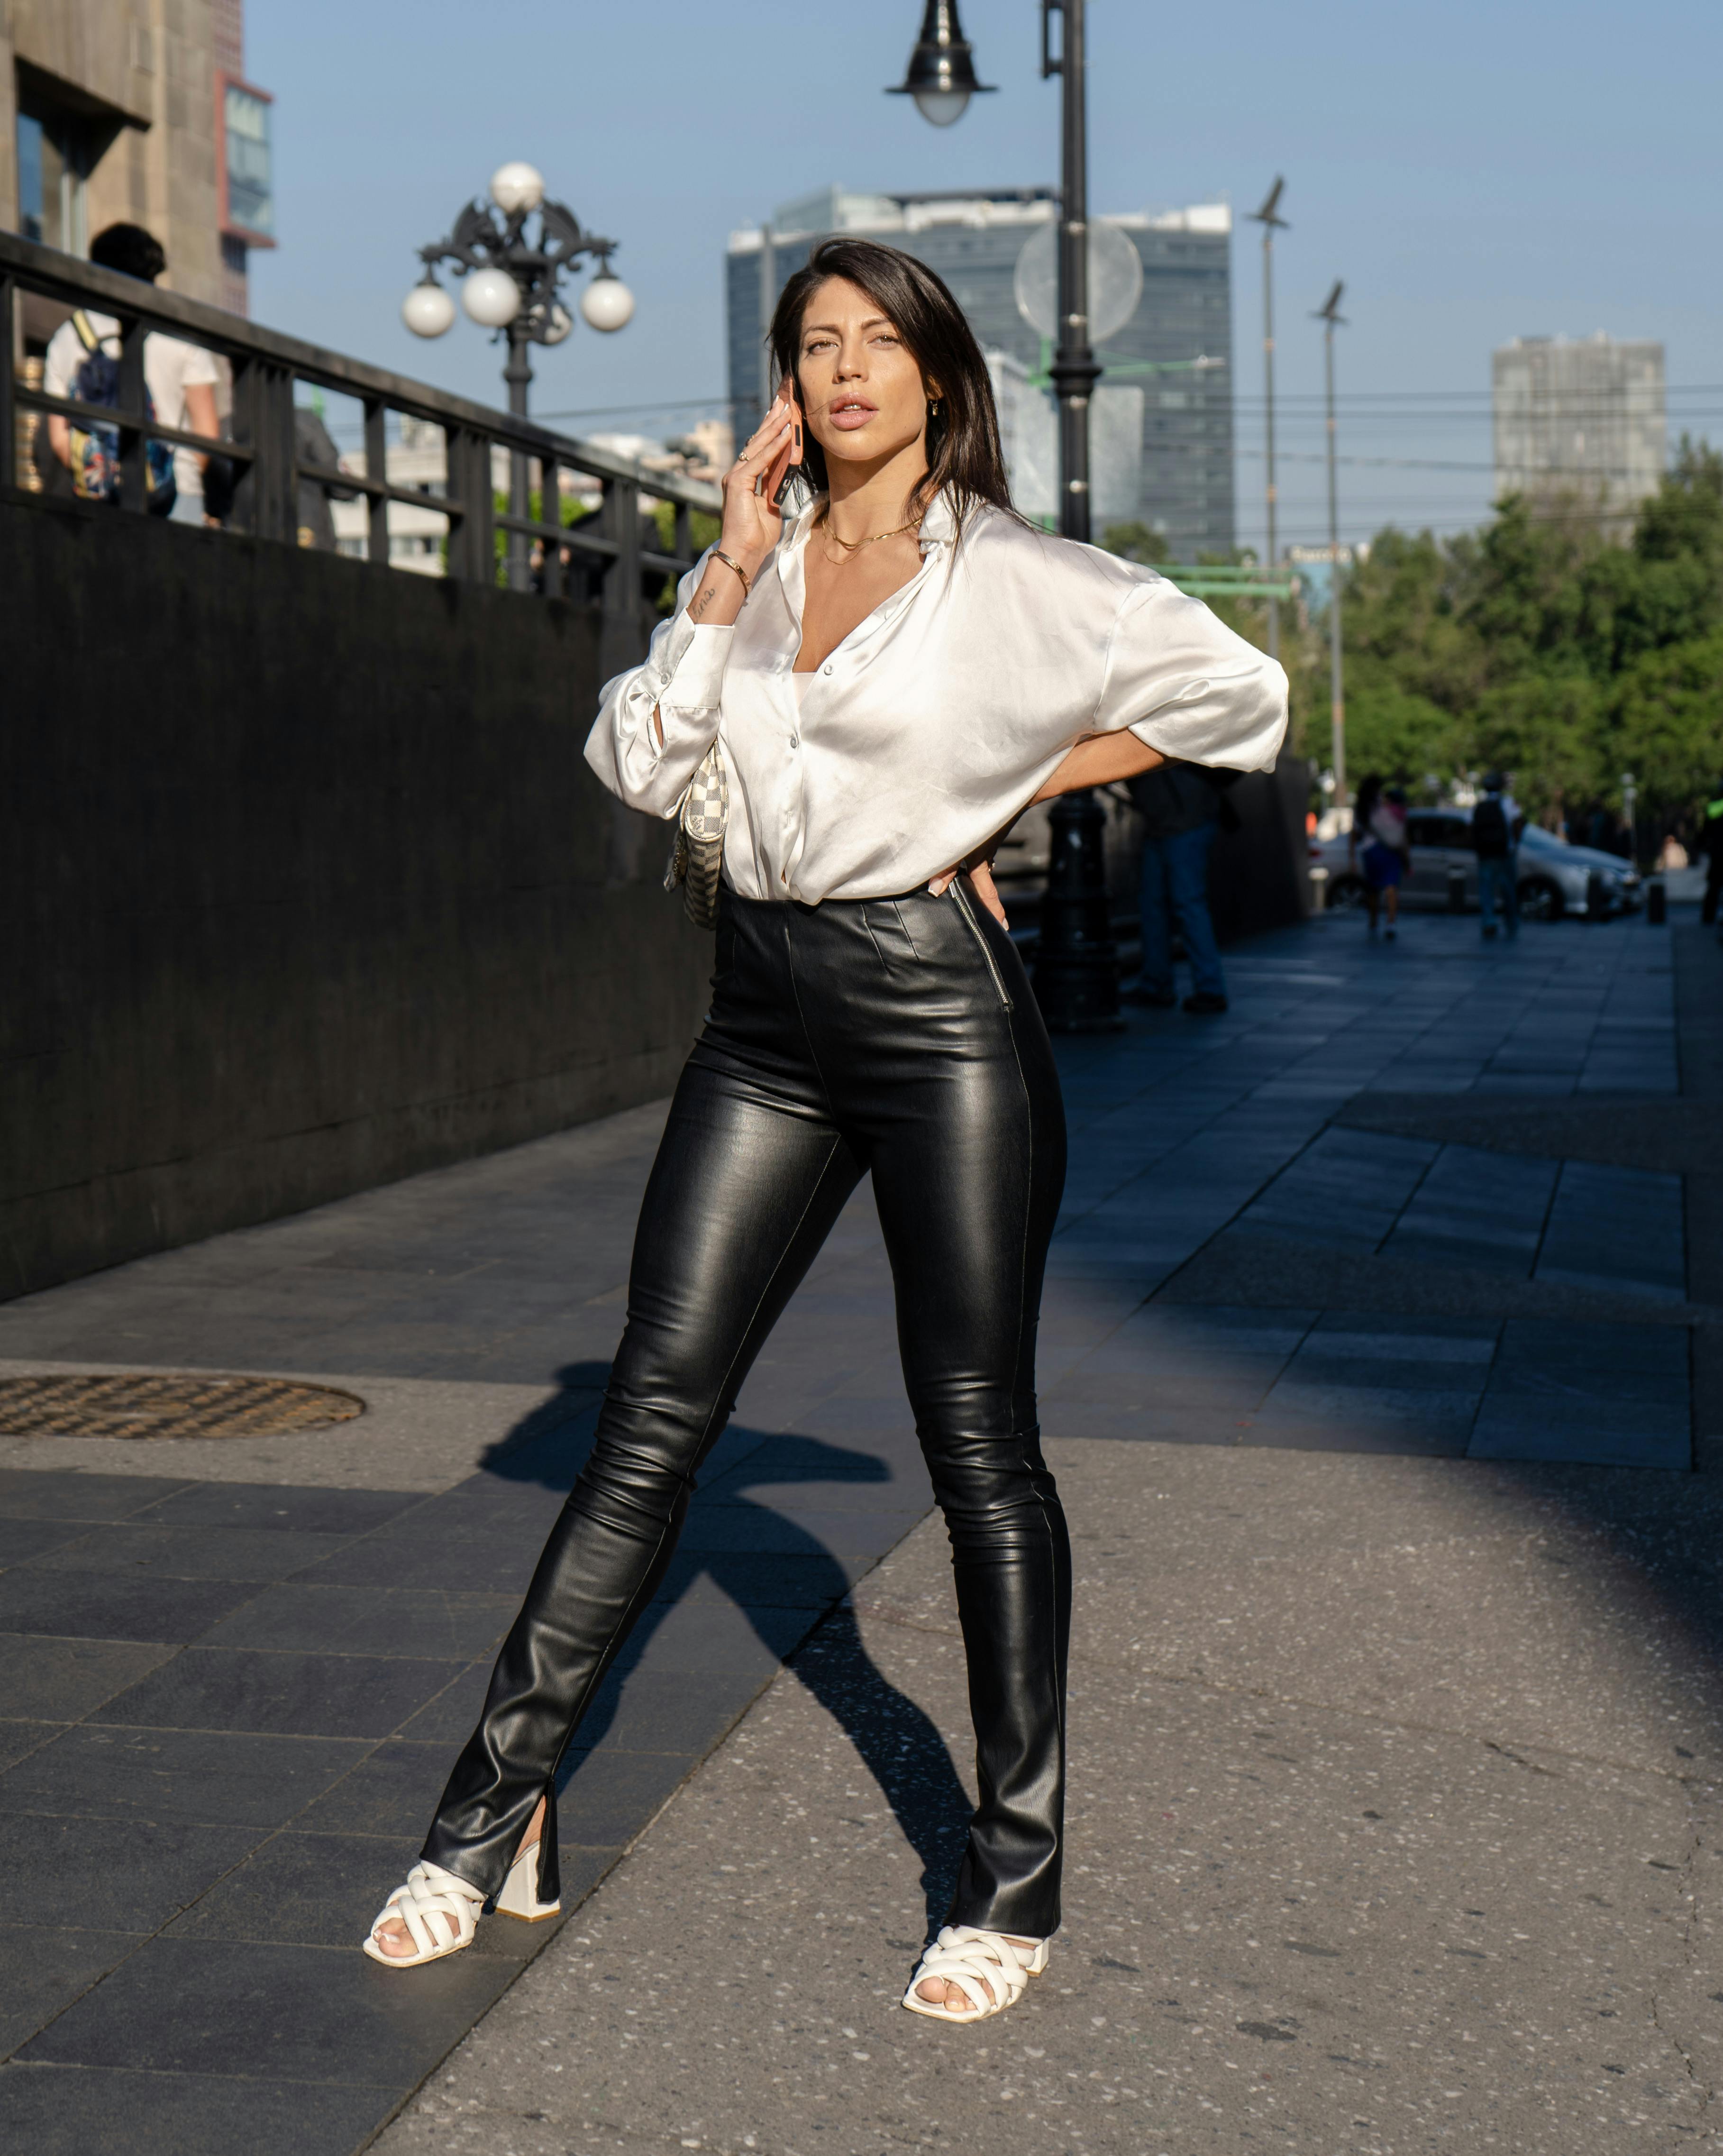 Fashion Girl Wearing Leather Pants and Long Sleeve Stock Image